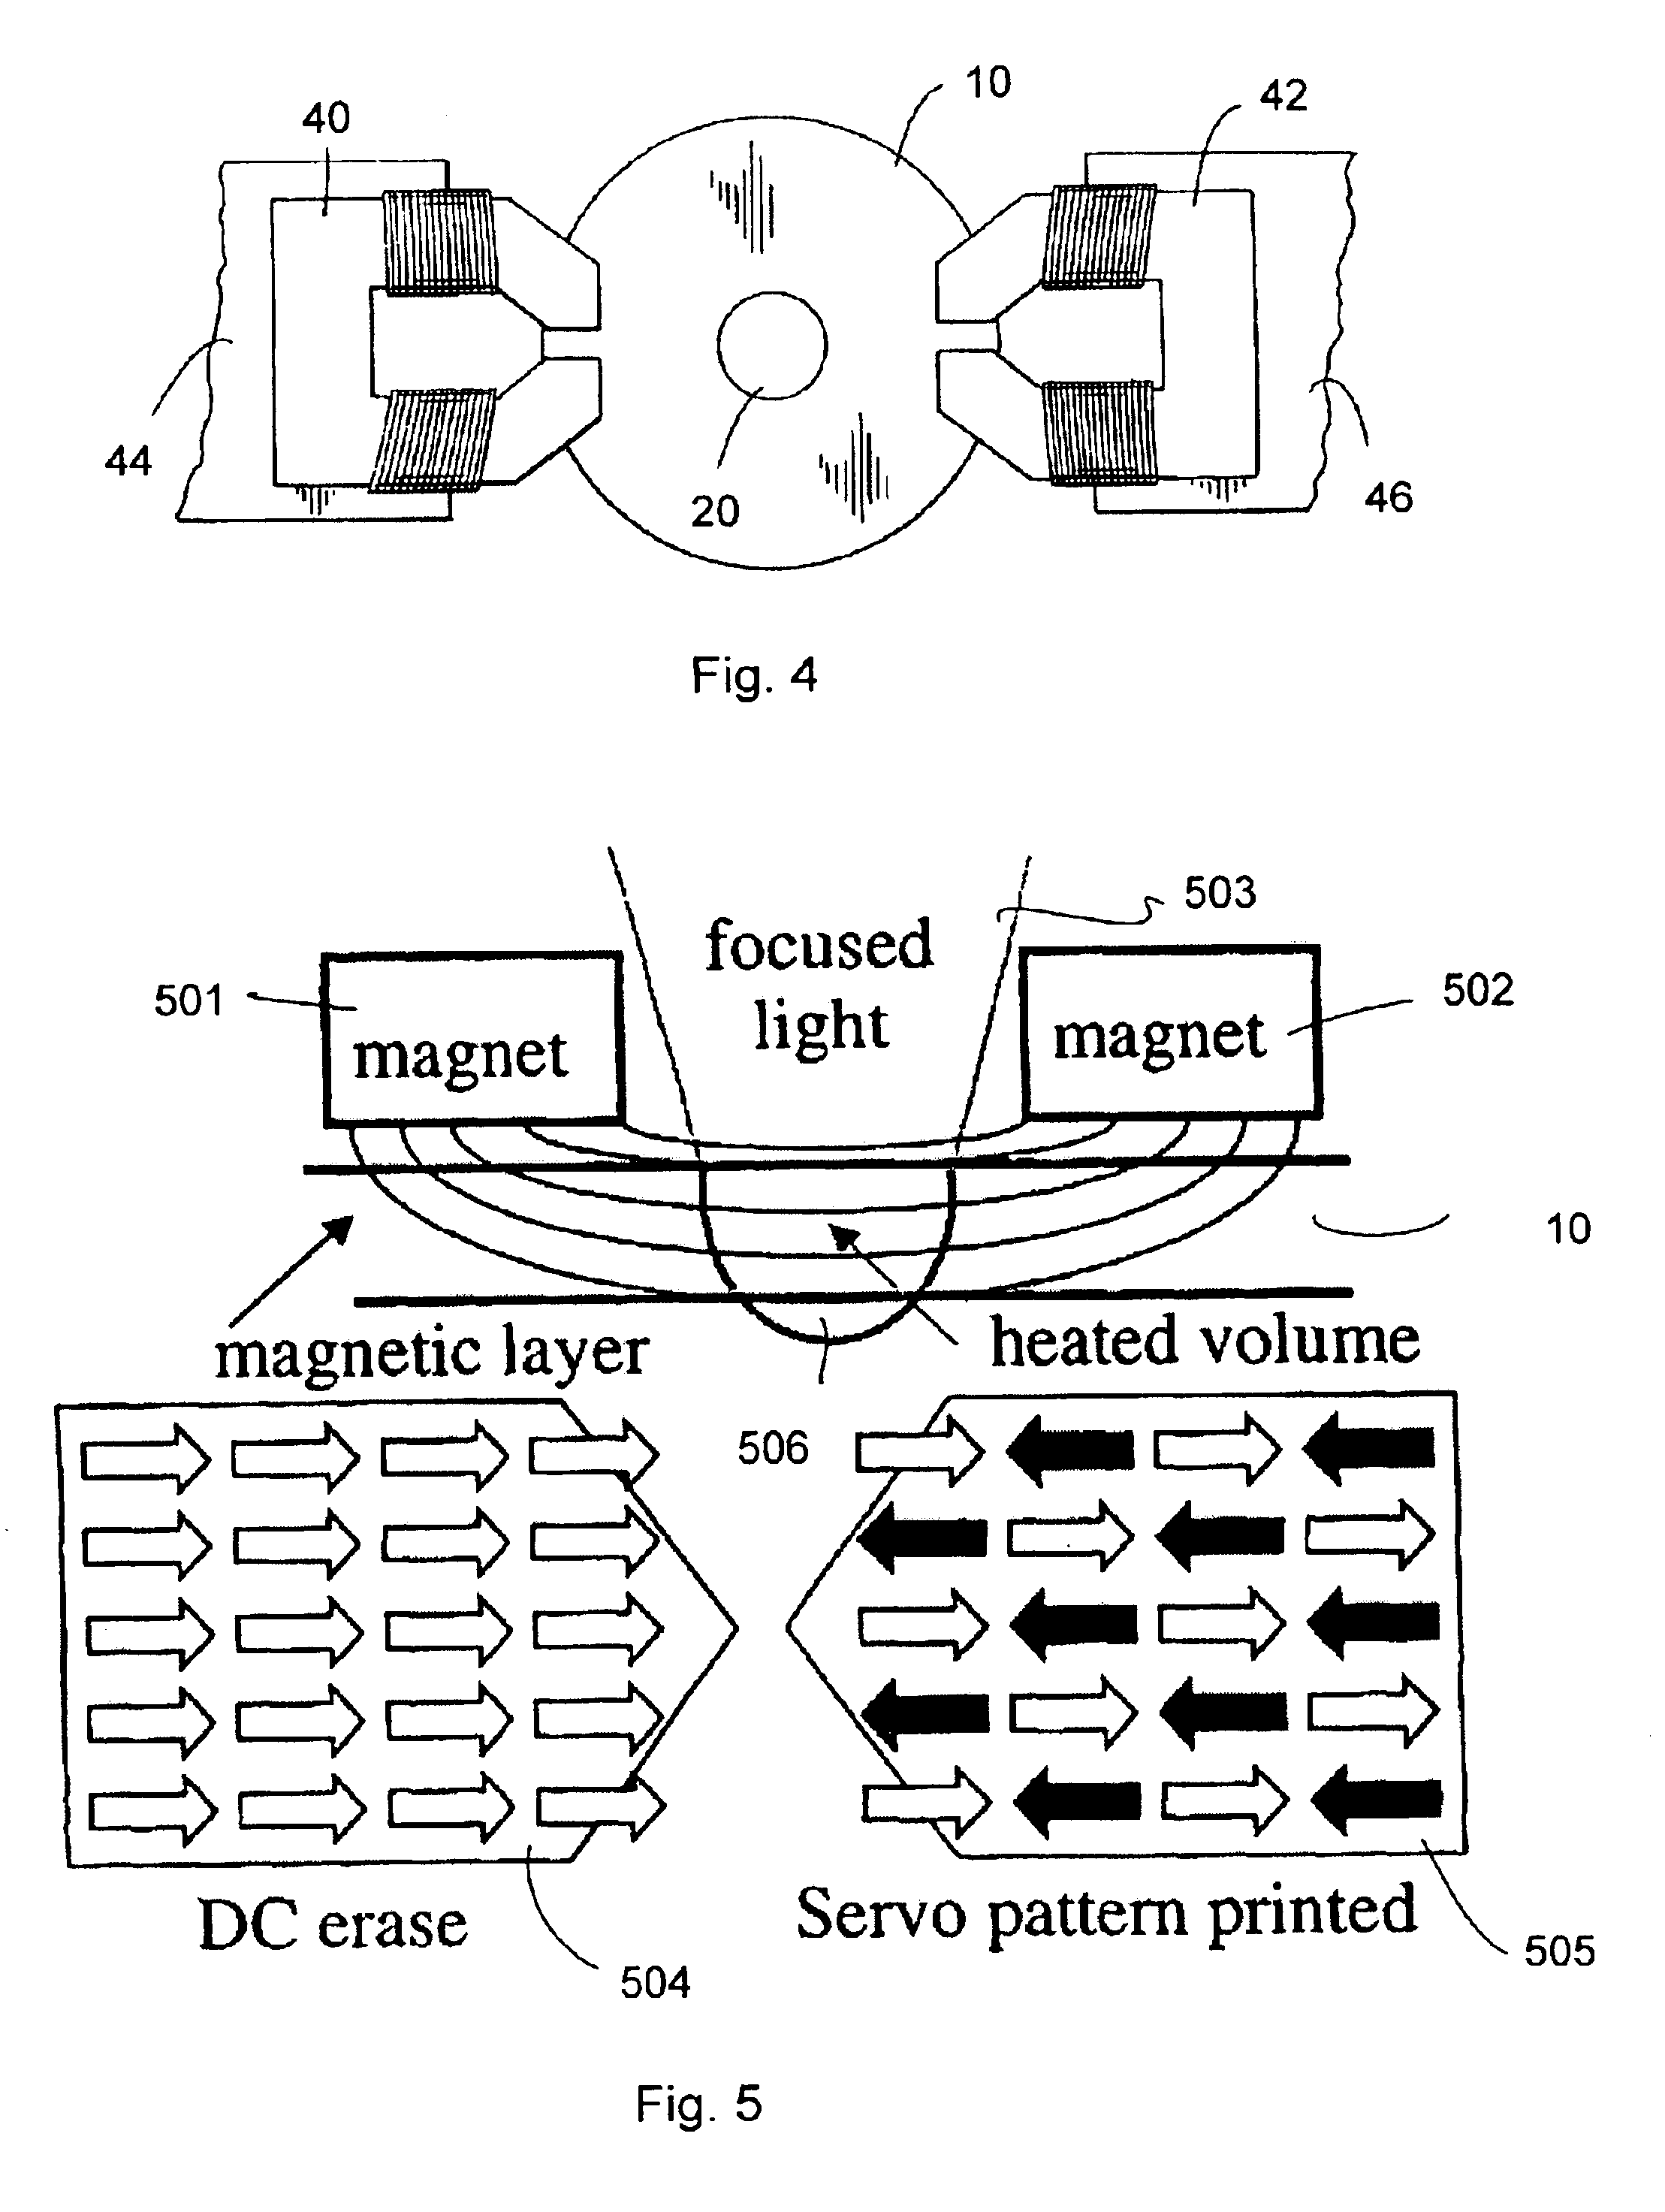 Magnetic alignment marking of hard disks